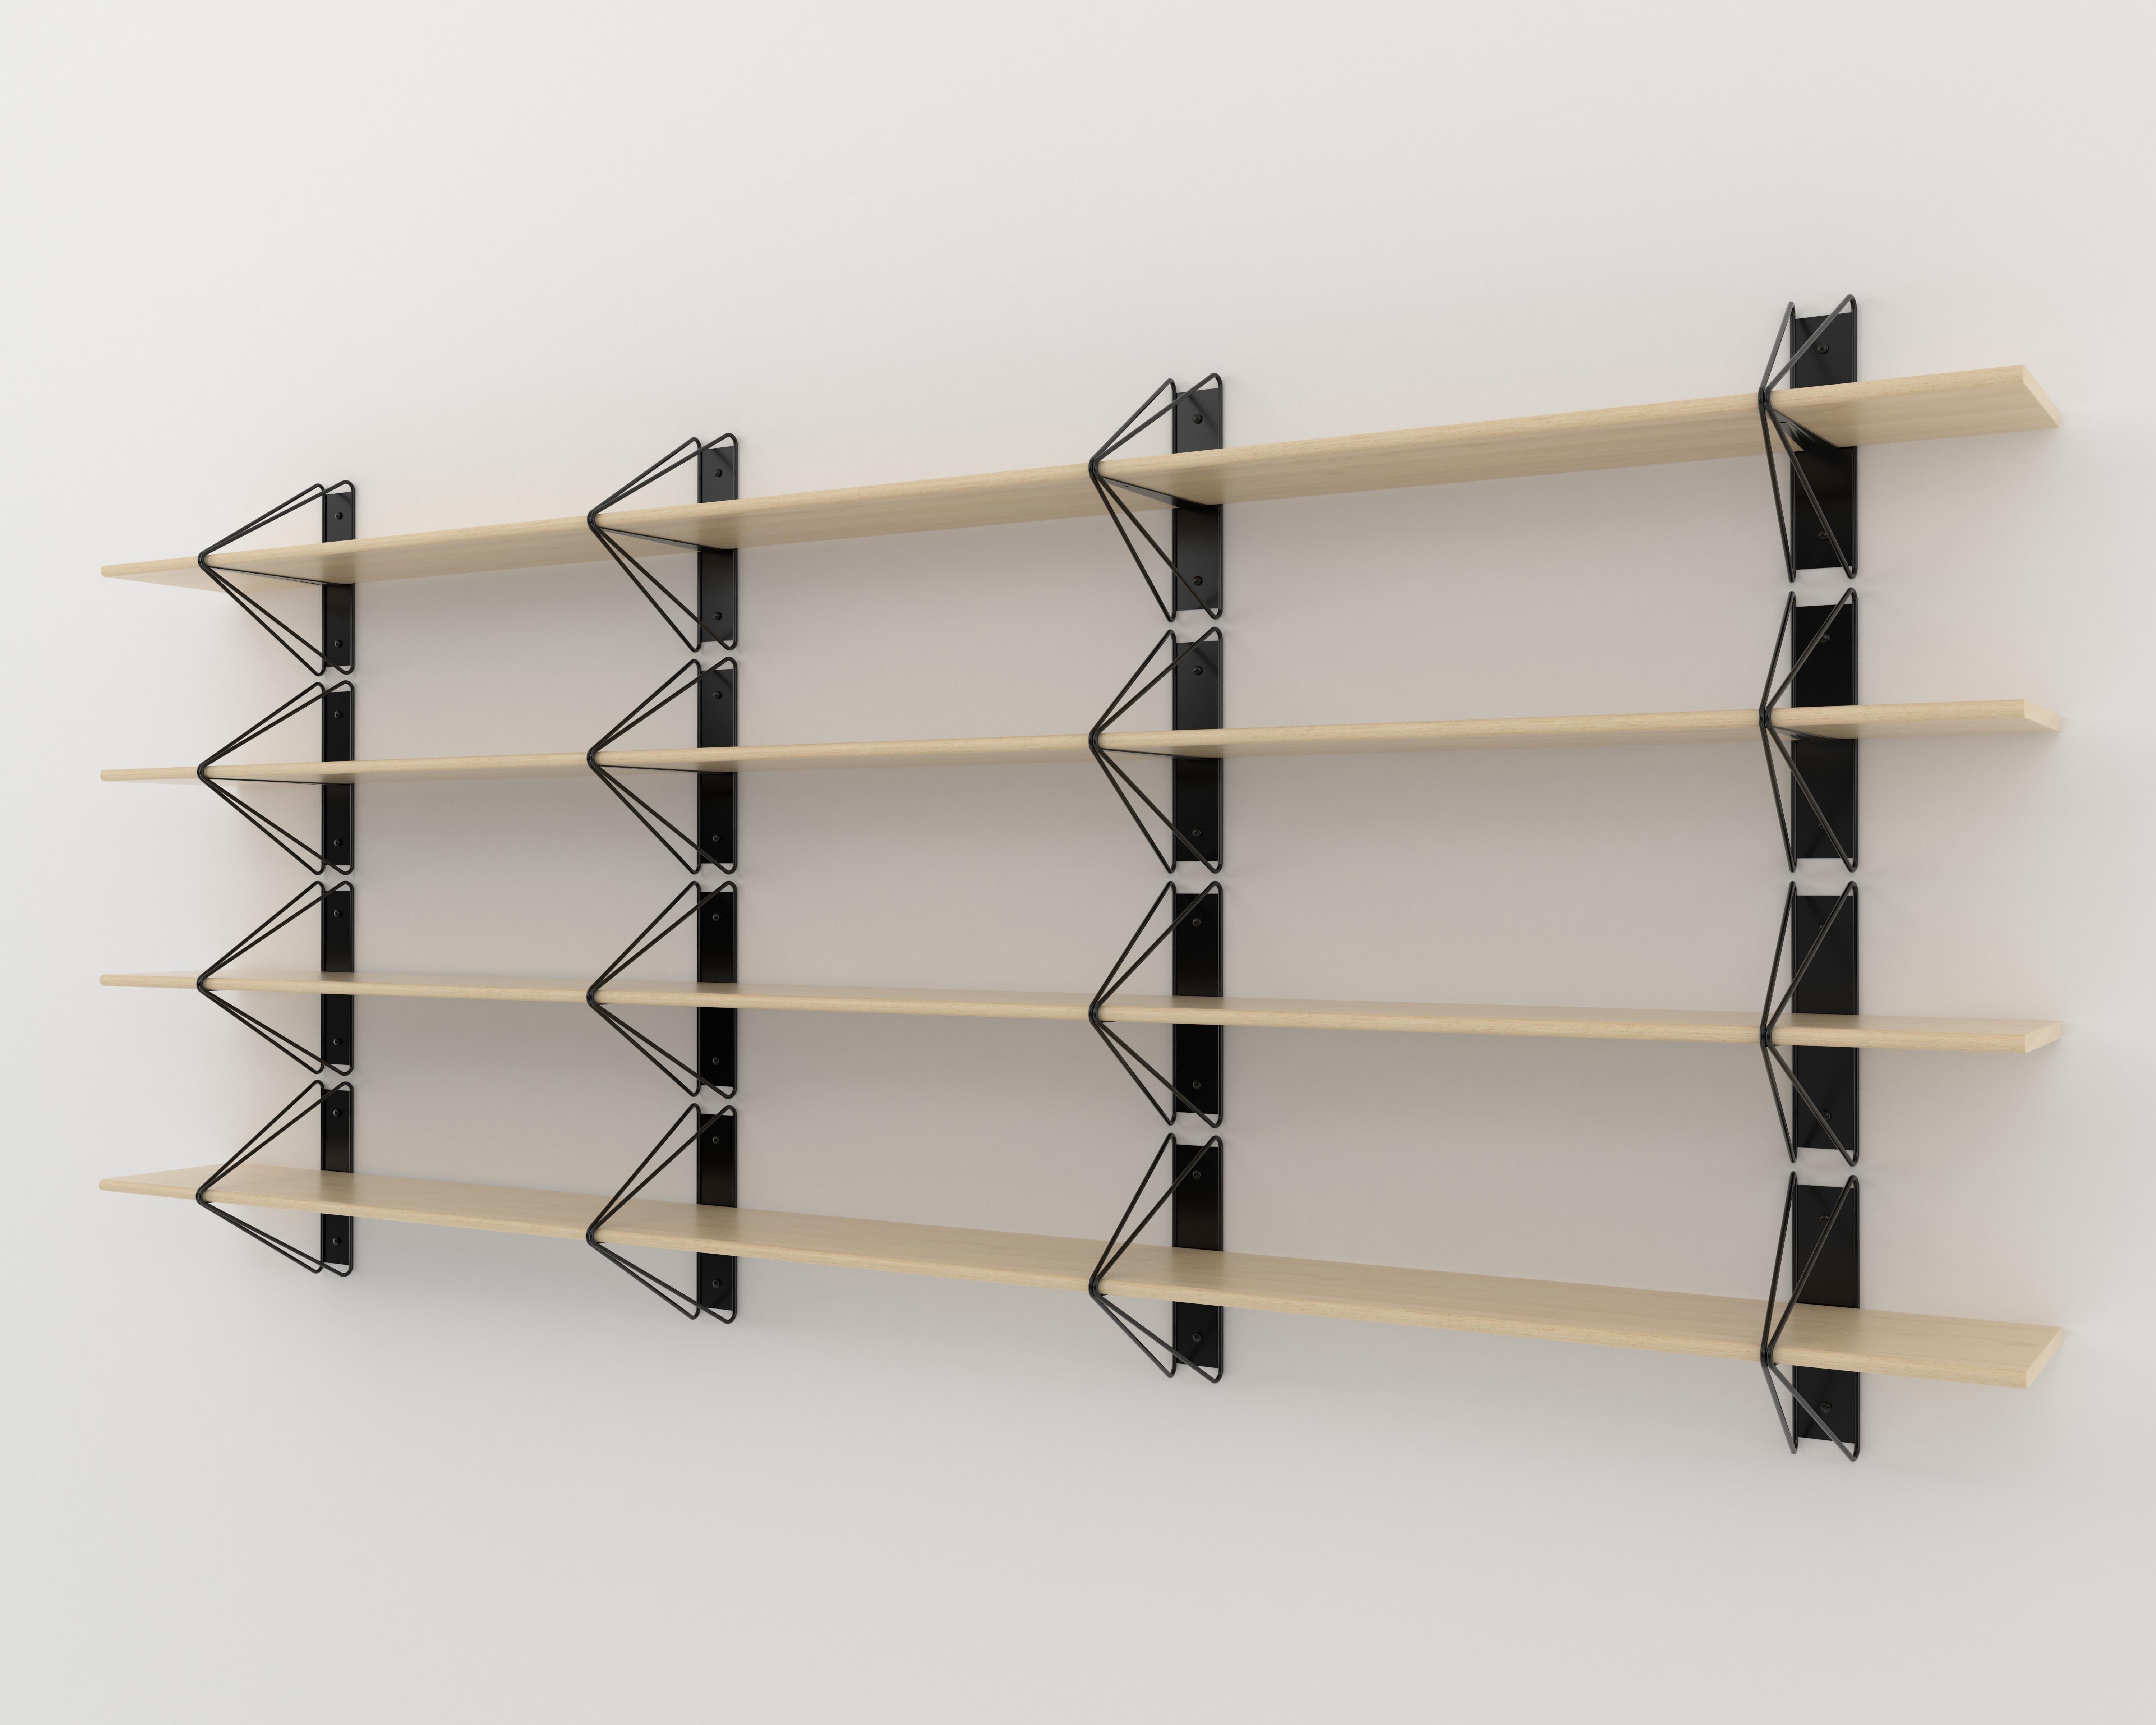 Metal Set of 4 Strut Shelves from Souda, Black and Maple, Made to Order For Sale